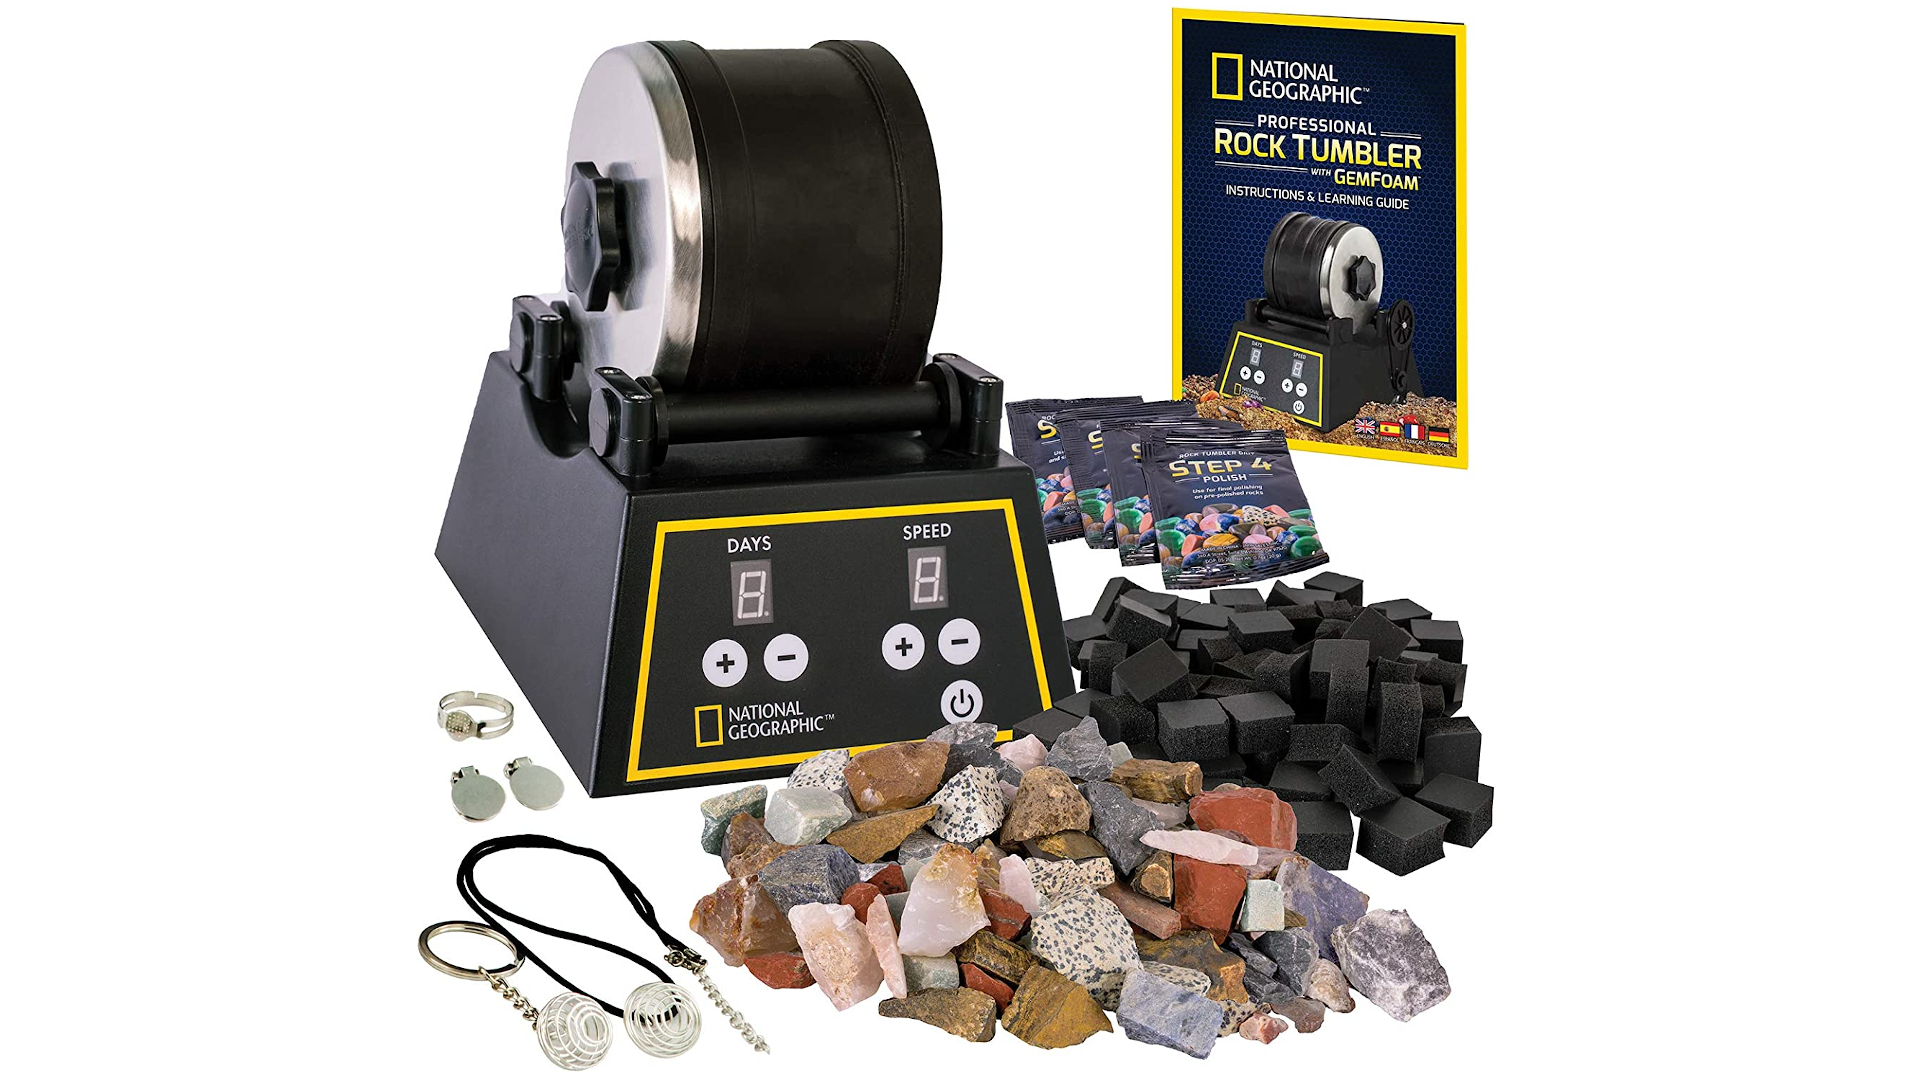 Save 15% on this National Geographic Rock Tumbler kit at